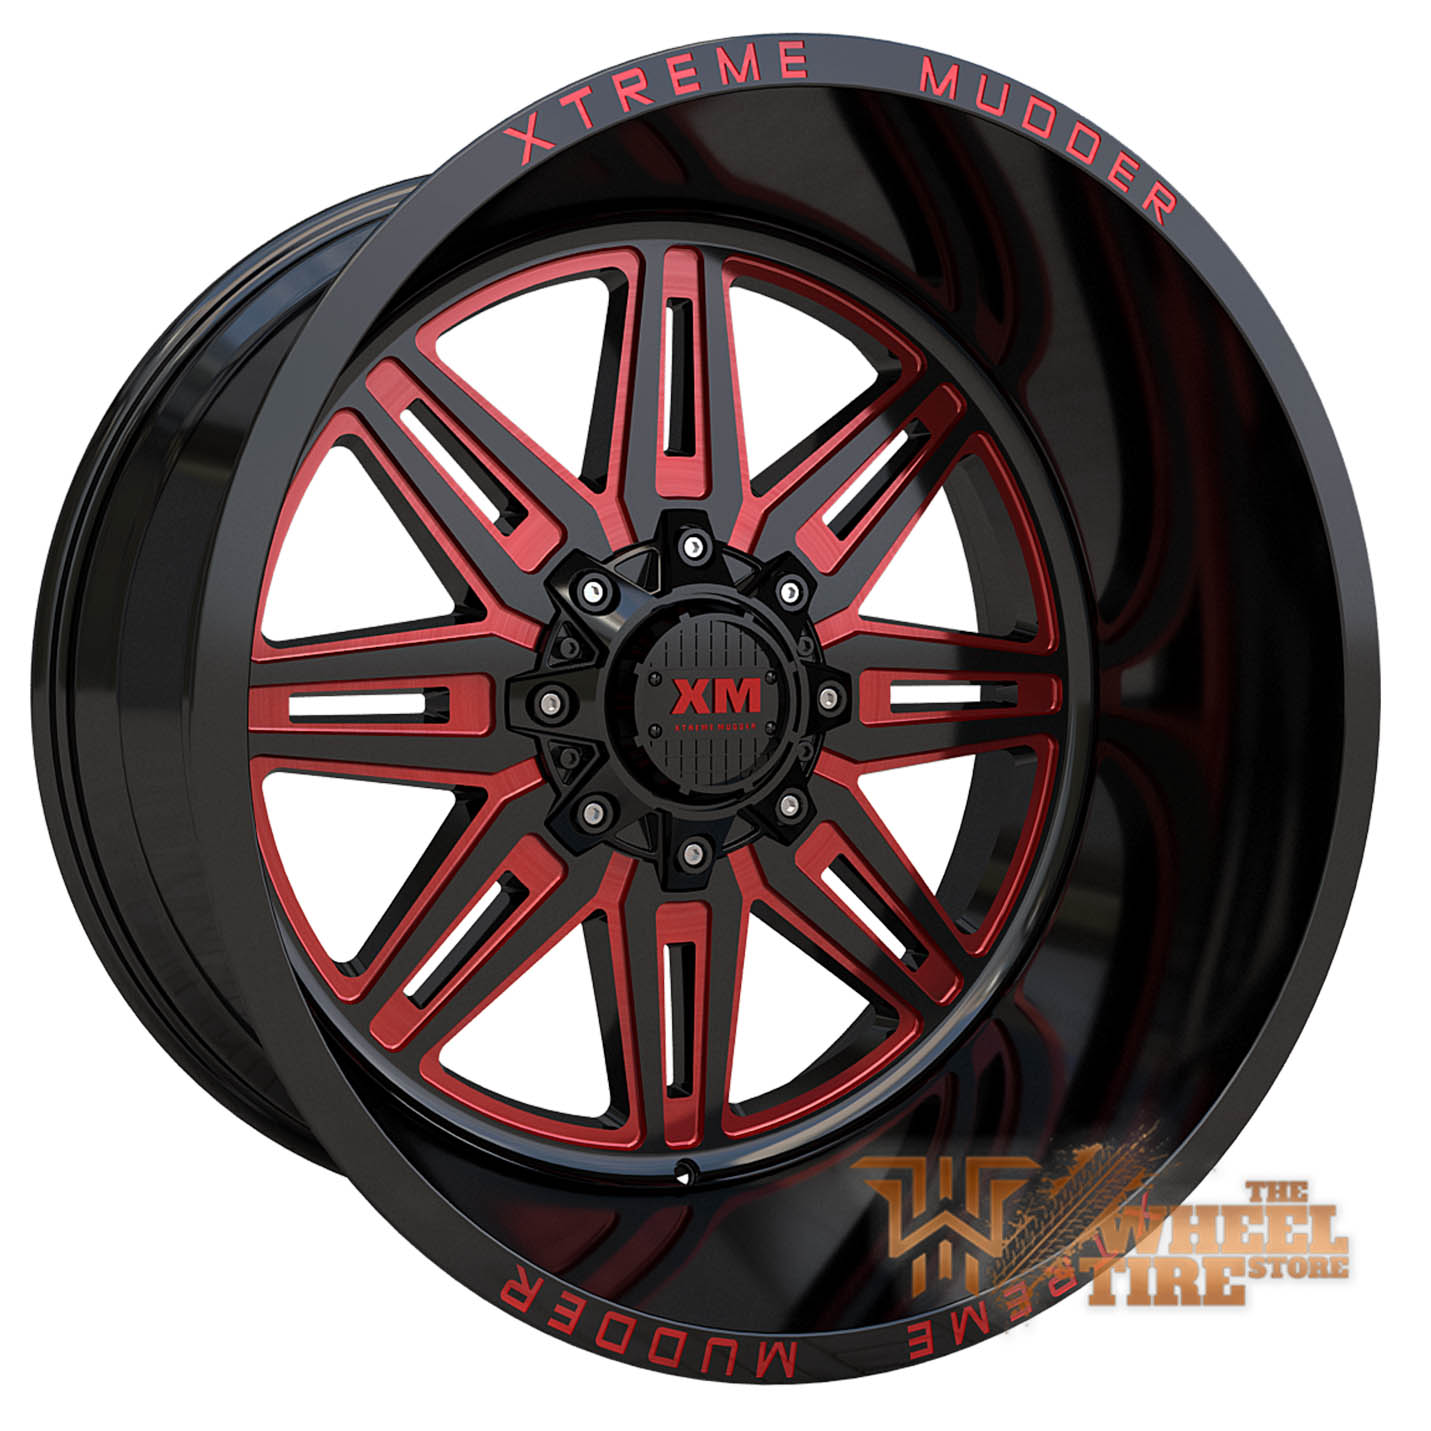 XTREME MUDDER XM-341 Wheel in Gloss Black Red Milled (Set of 4)